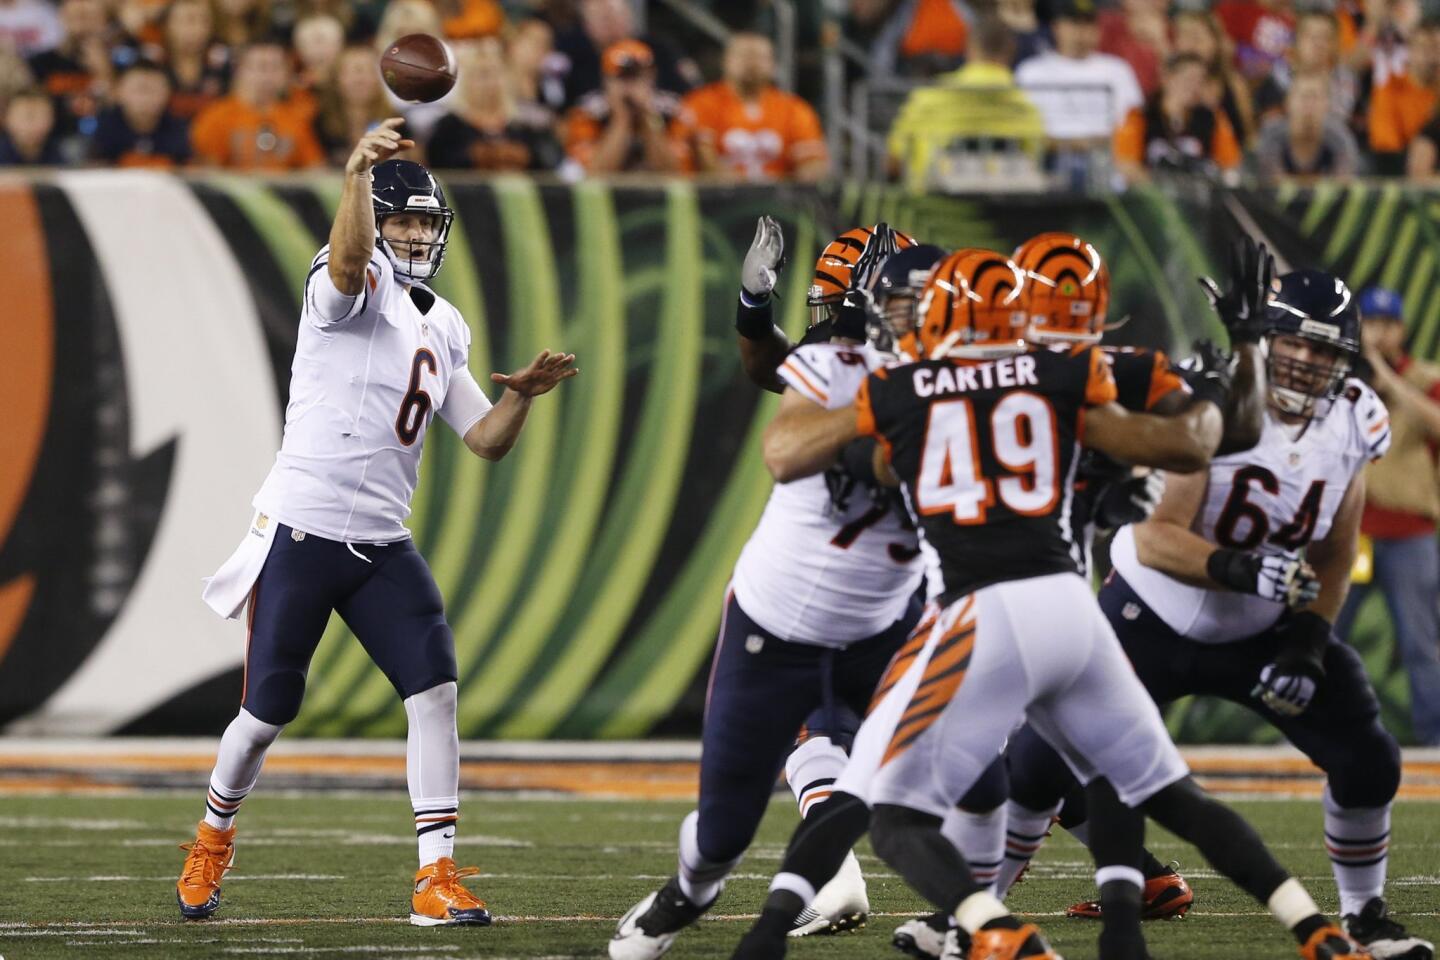 Bears quarterback Jay Cutler throws in a preseason game against the Bengals.